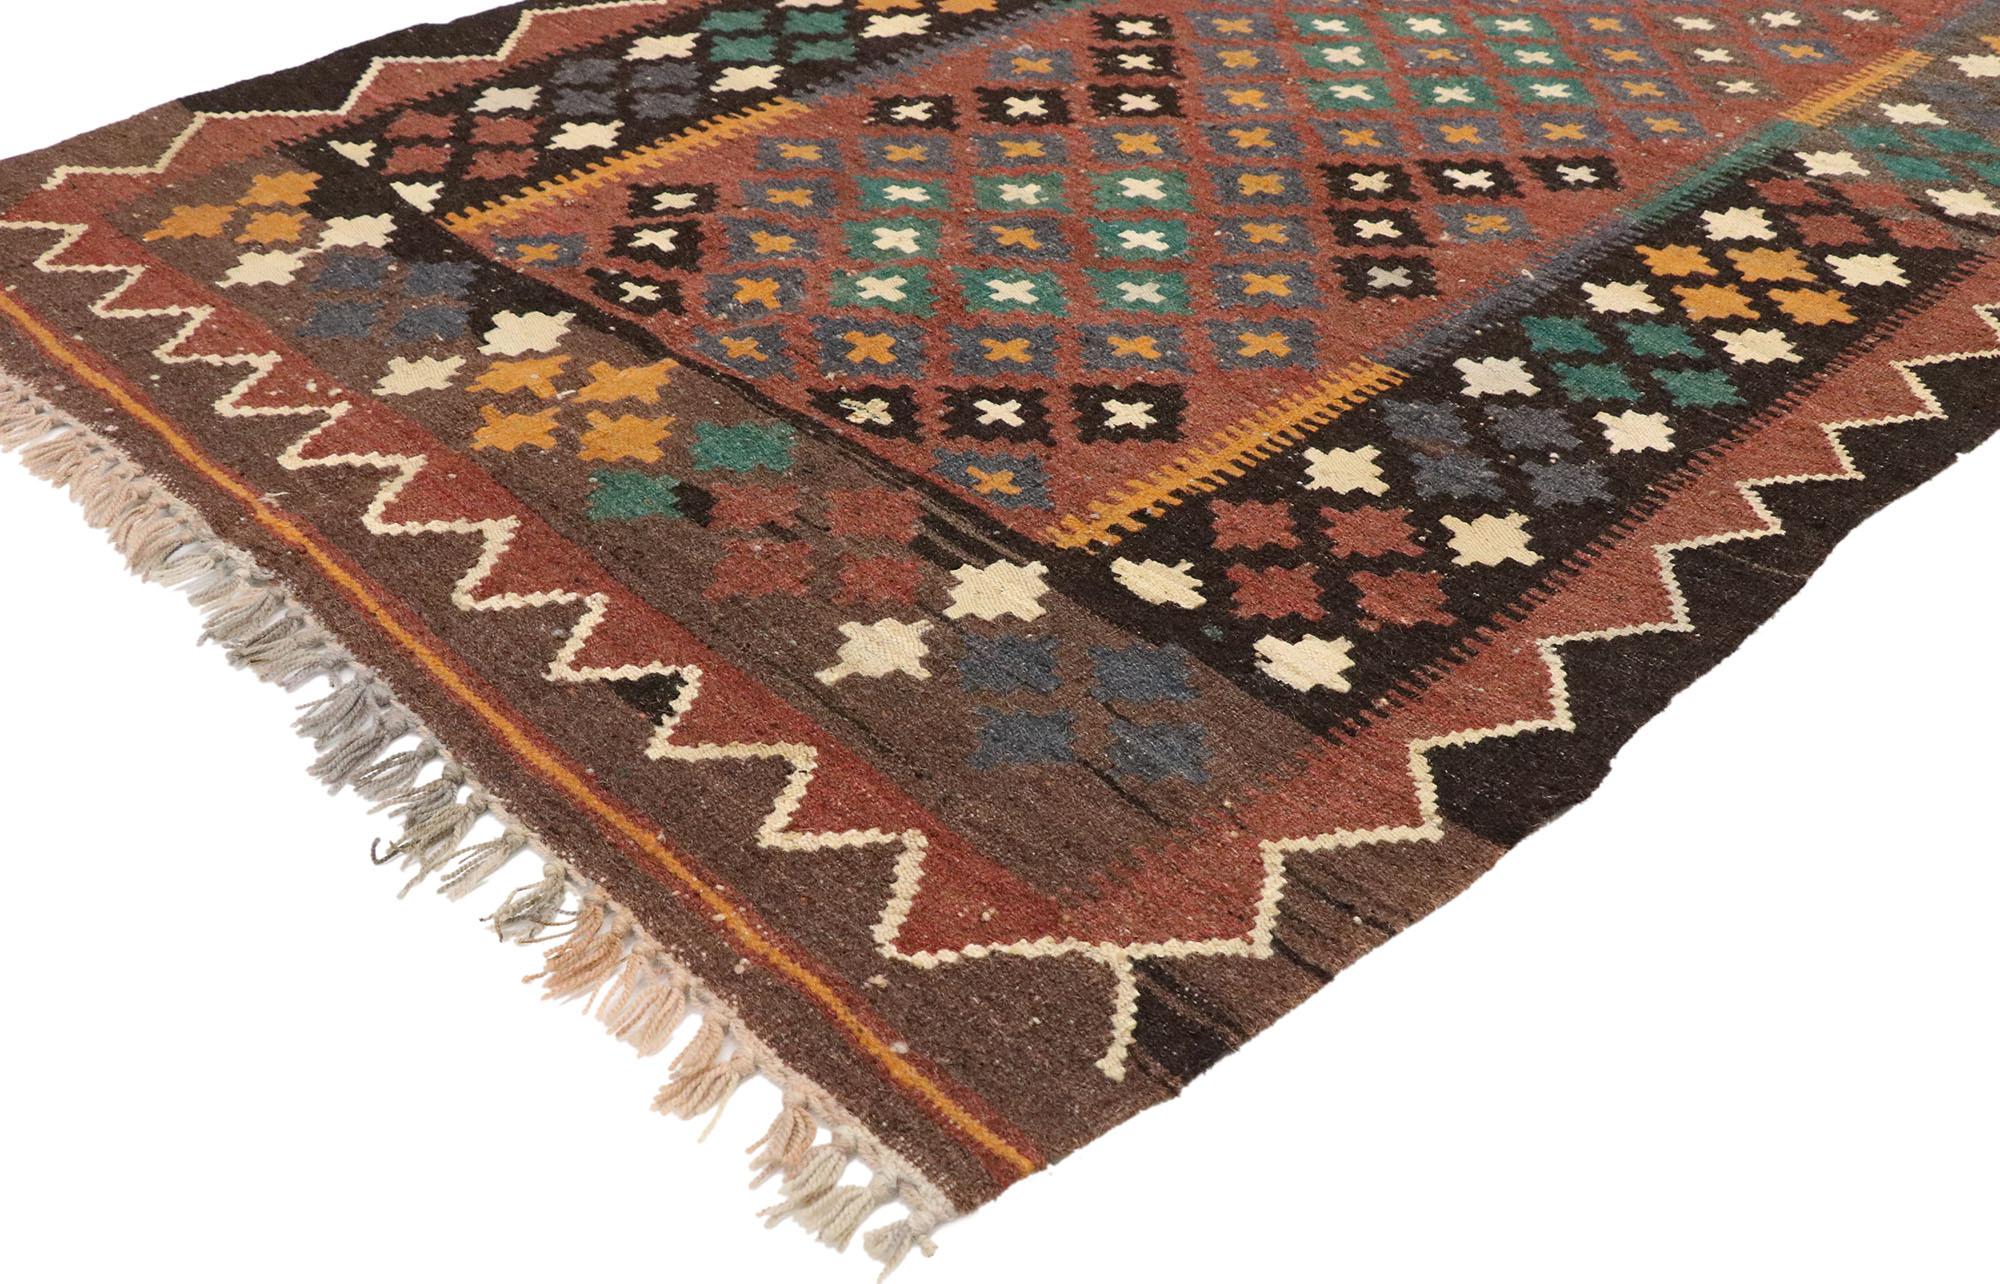 72250, vintage Afghan Kilim rug with Rustic Modern Pacific Northwest style. With its bold expressive design, incredible detail and texture, this handwoven wool vintage Afghan Kilim rug is a captivating vision of woven beauty. The abrashed brick red